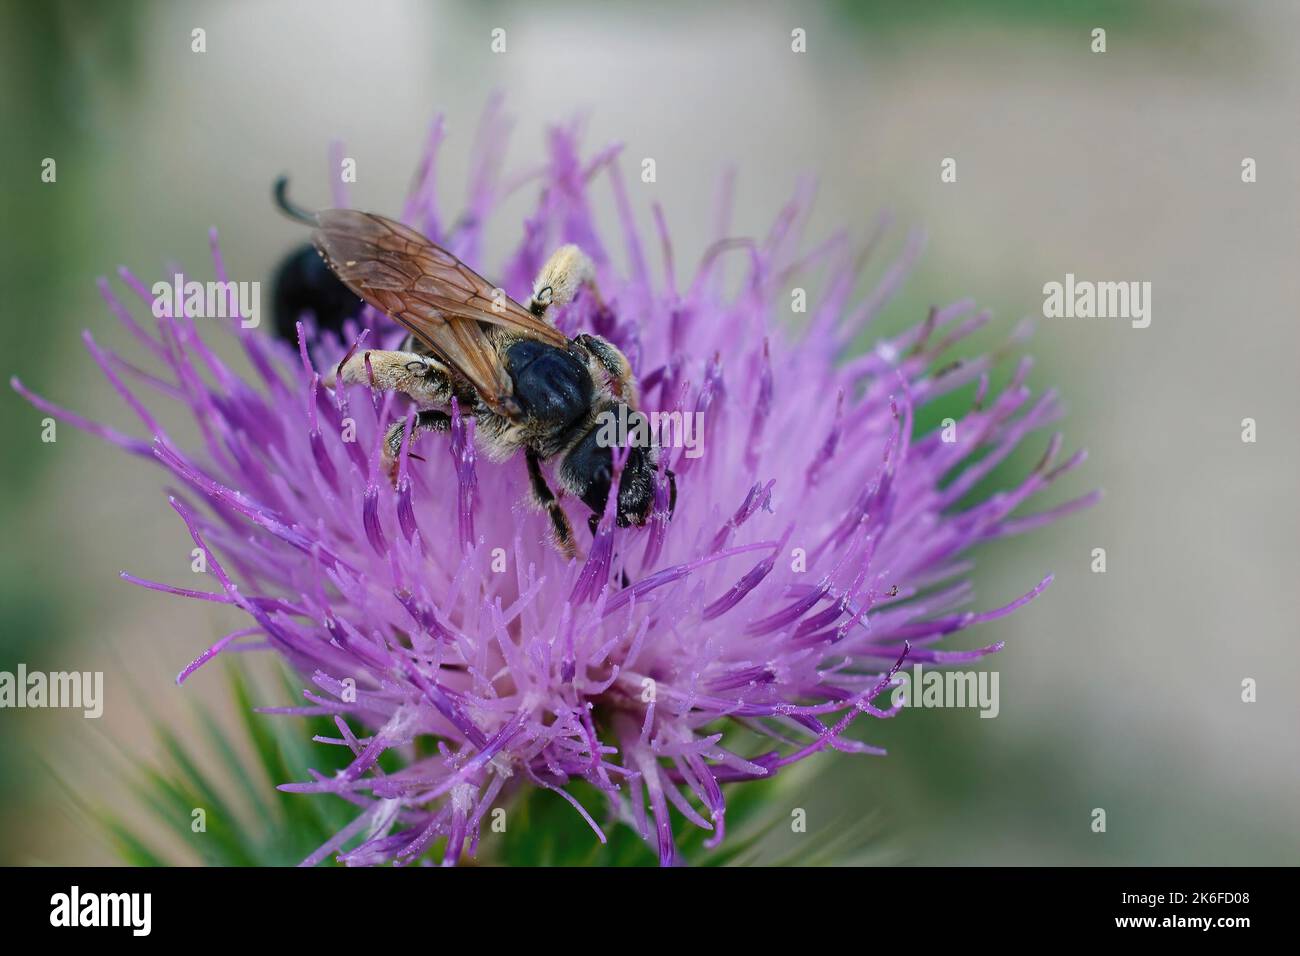 A closeup of furrow bee sipping nectar from flower isolated in blurred background Stock Photo